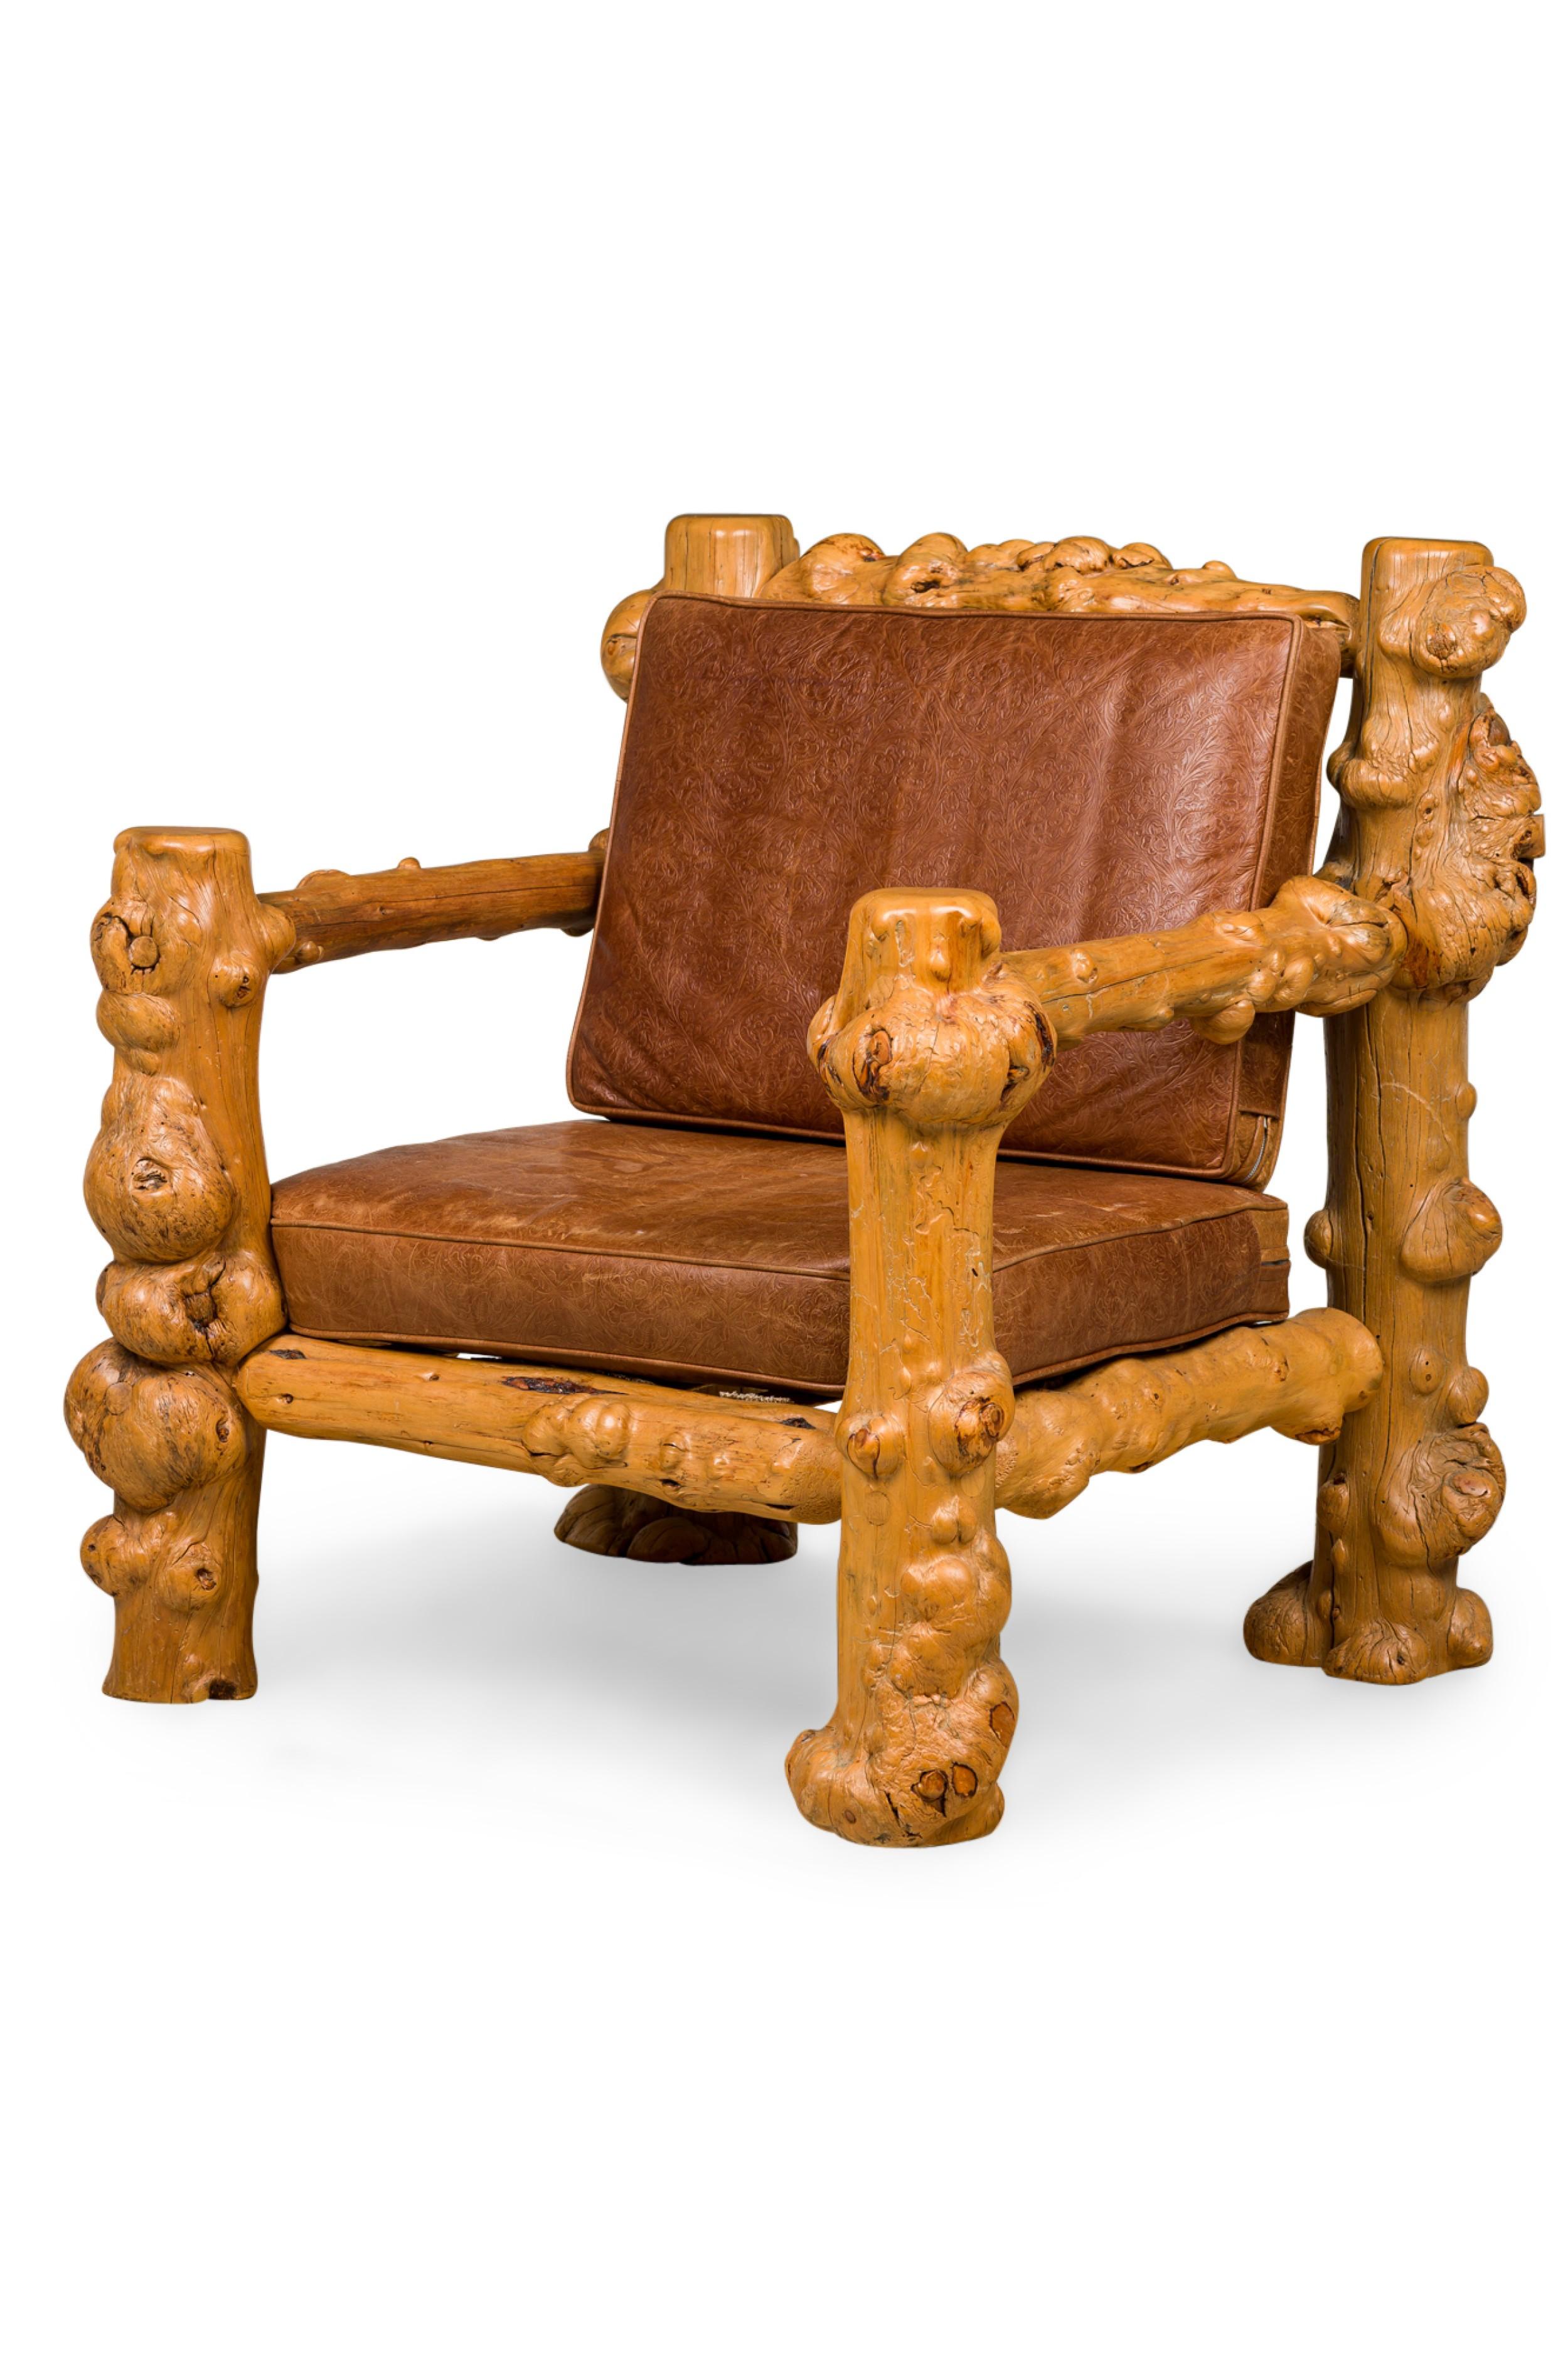 Rustic Blond Root Wood and Embossed Leather Throne Armchair For Sale 4